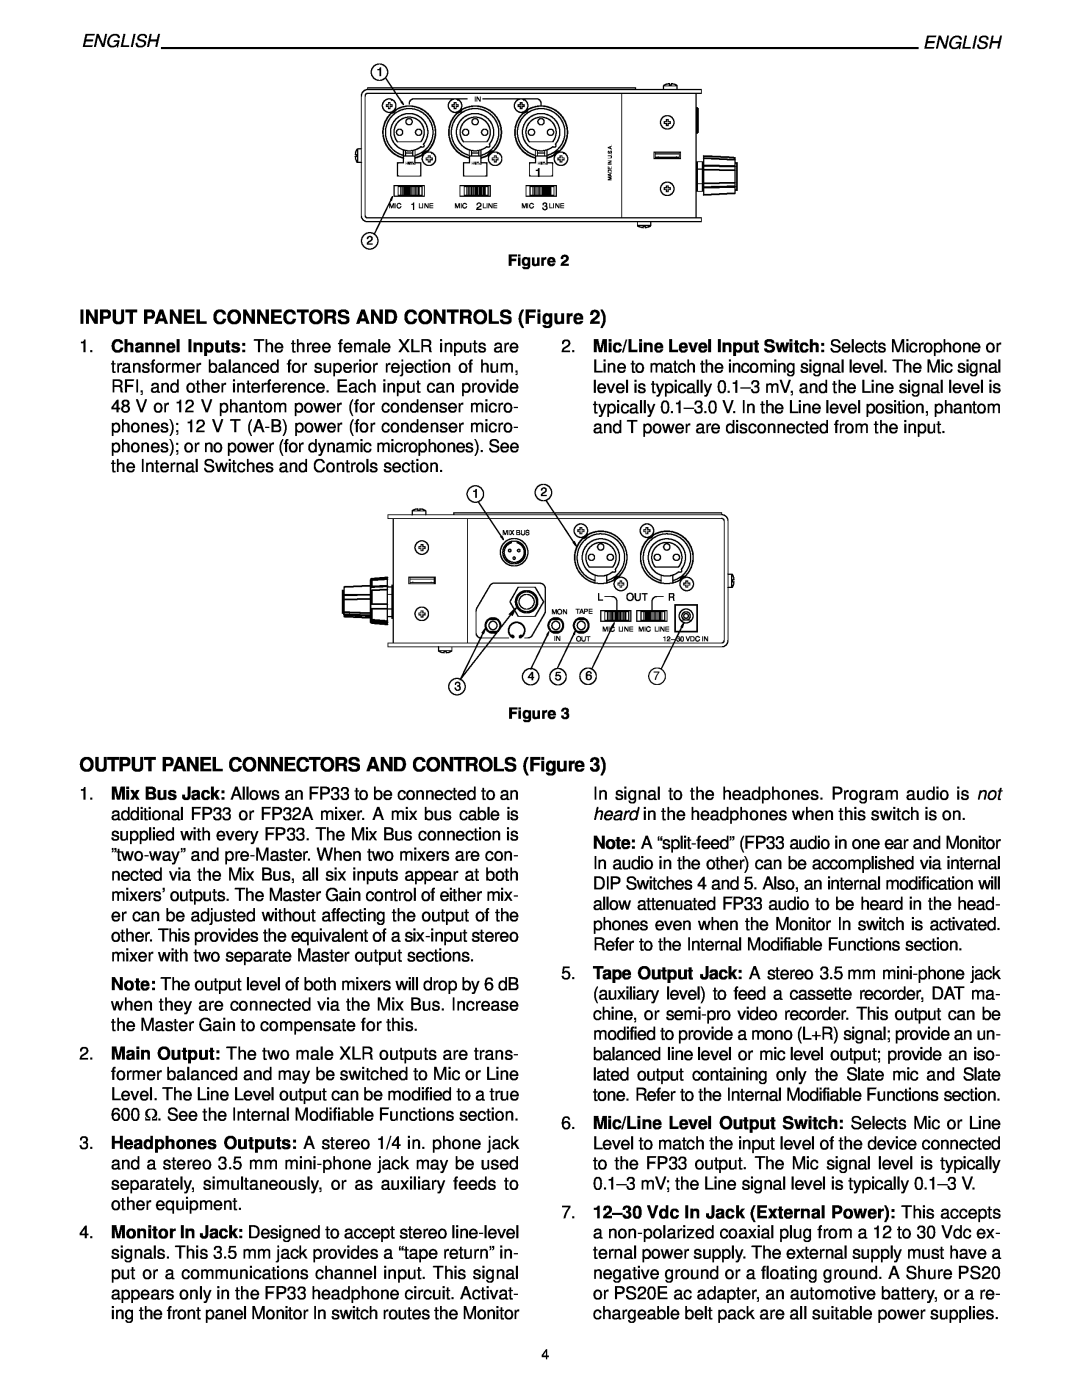 Shure FP33 manual INPUT PANEL CONNECTORS AND CONTROLS Figure, OUTPUT PANEL CONNECTORS AND CONTROLS Figure, English, Out R 